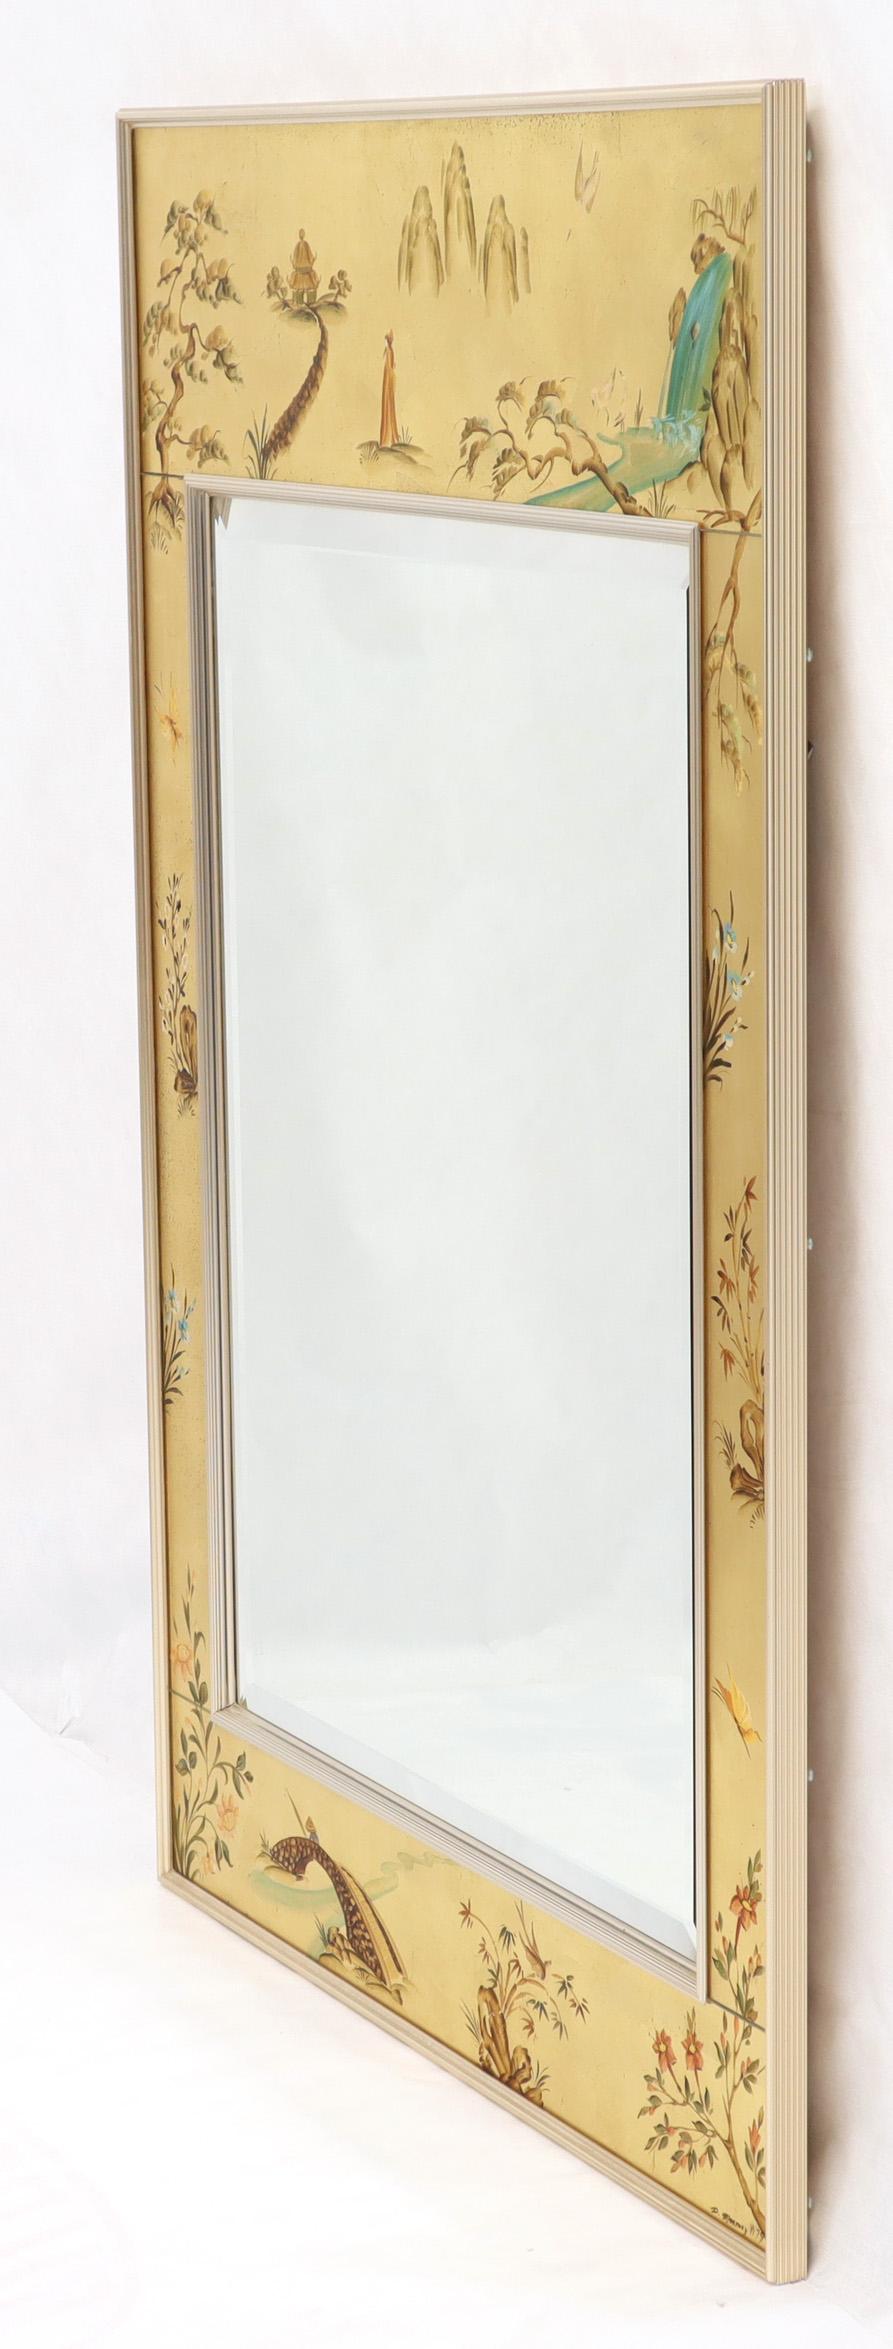 La Barge Reverse Painted Gold Leaf Rectangular Frame Decorative Mirror In Good Condition For Sale In Rockaway, NJ